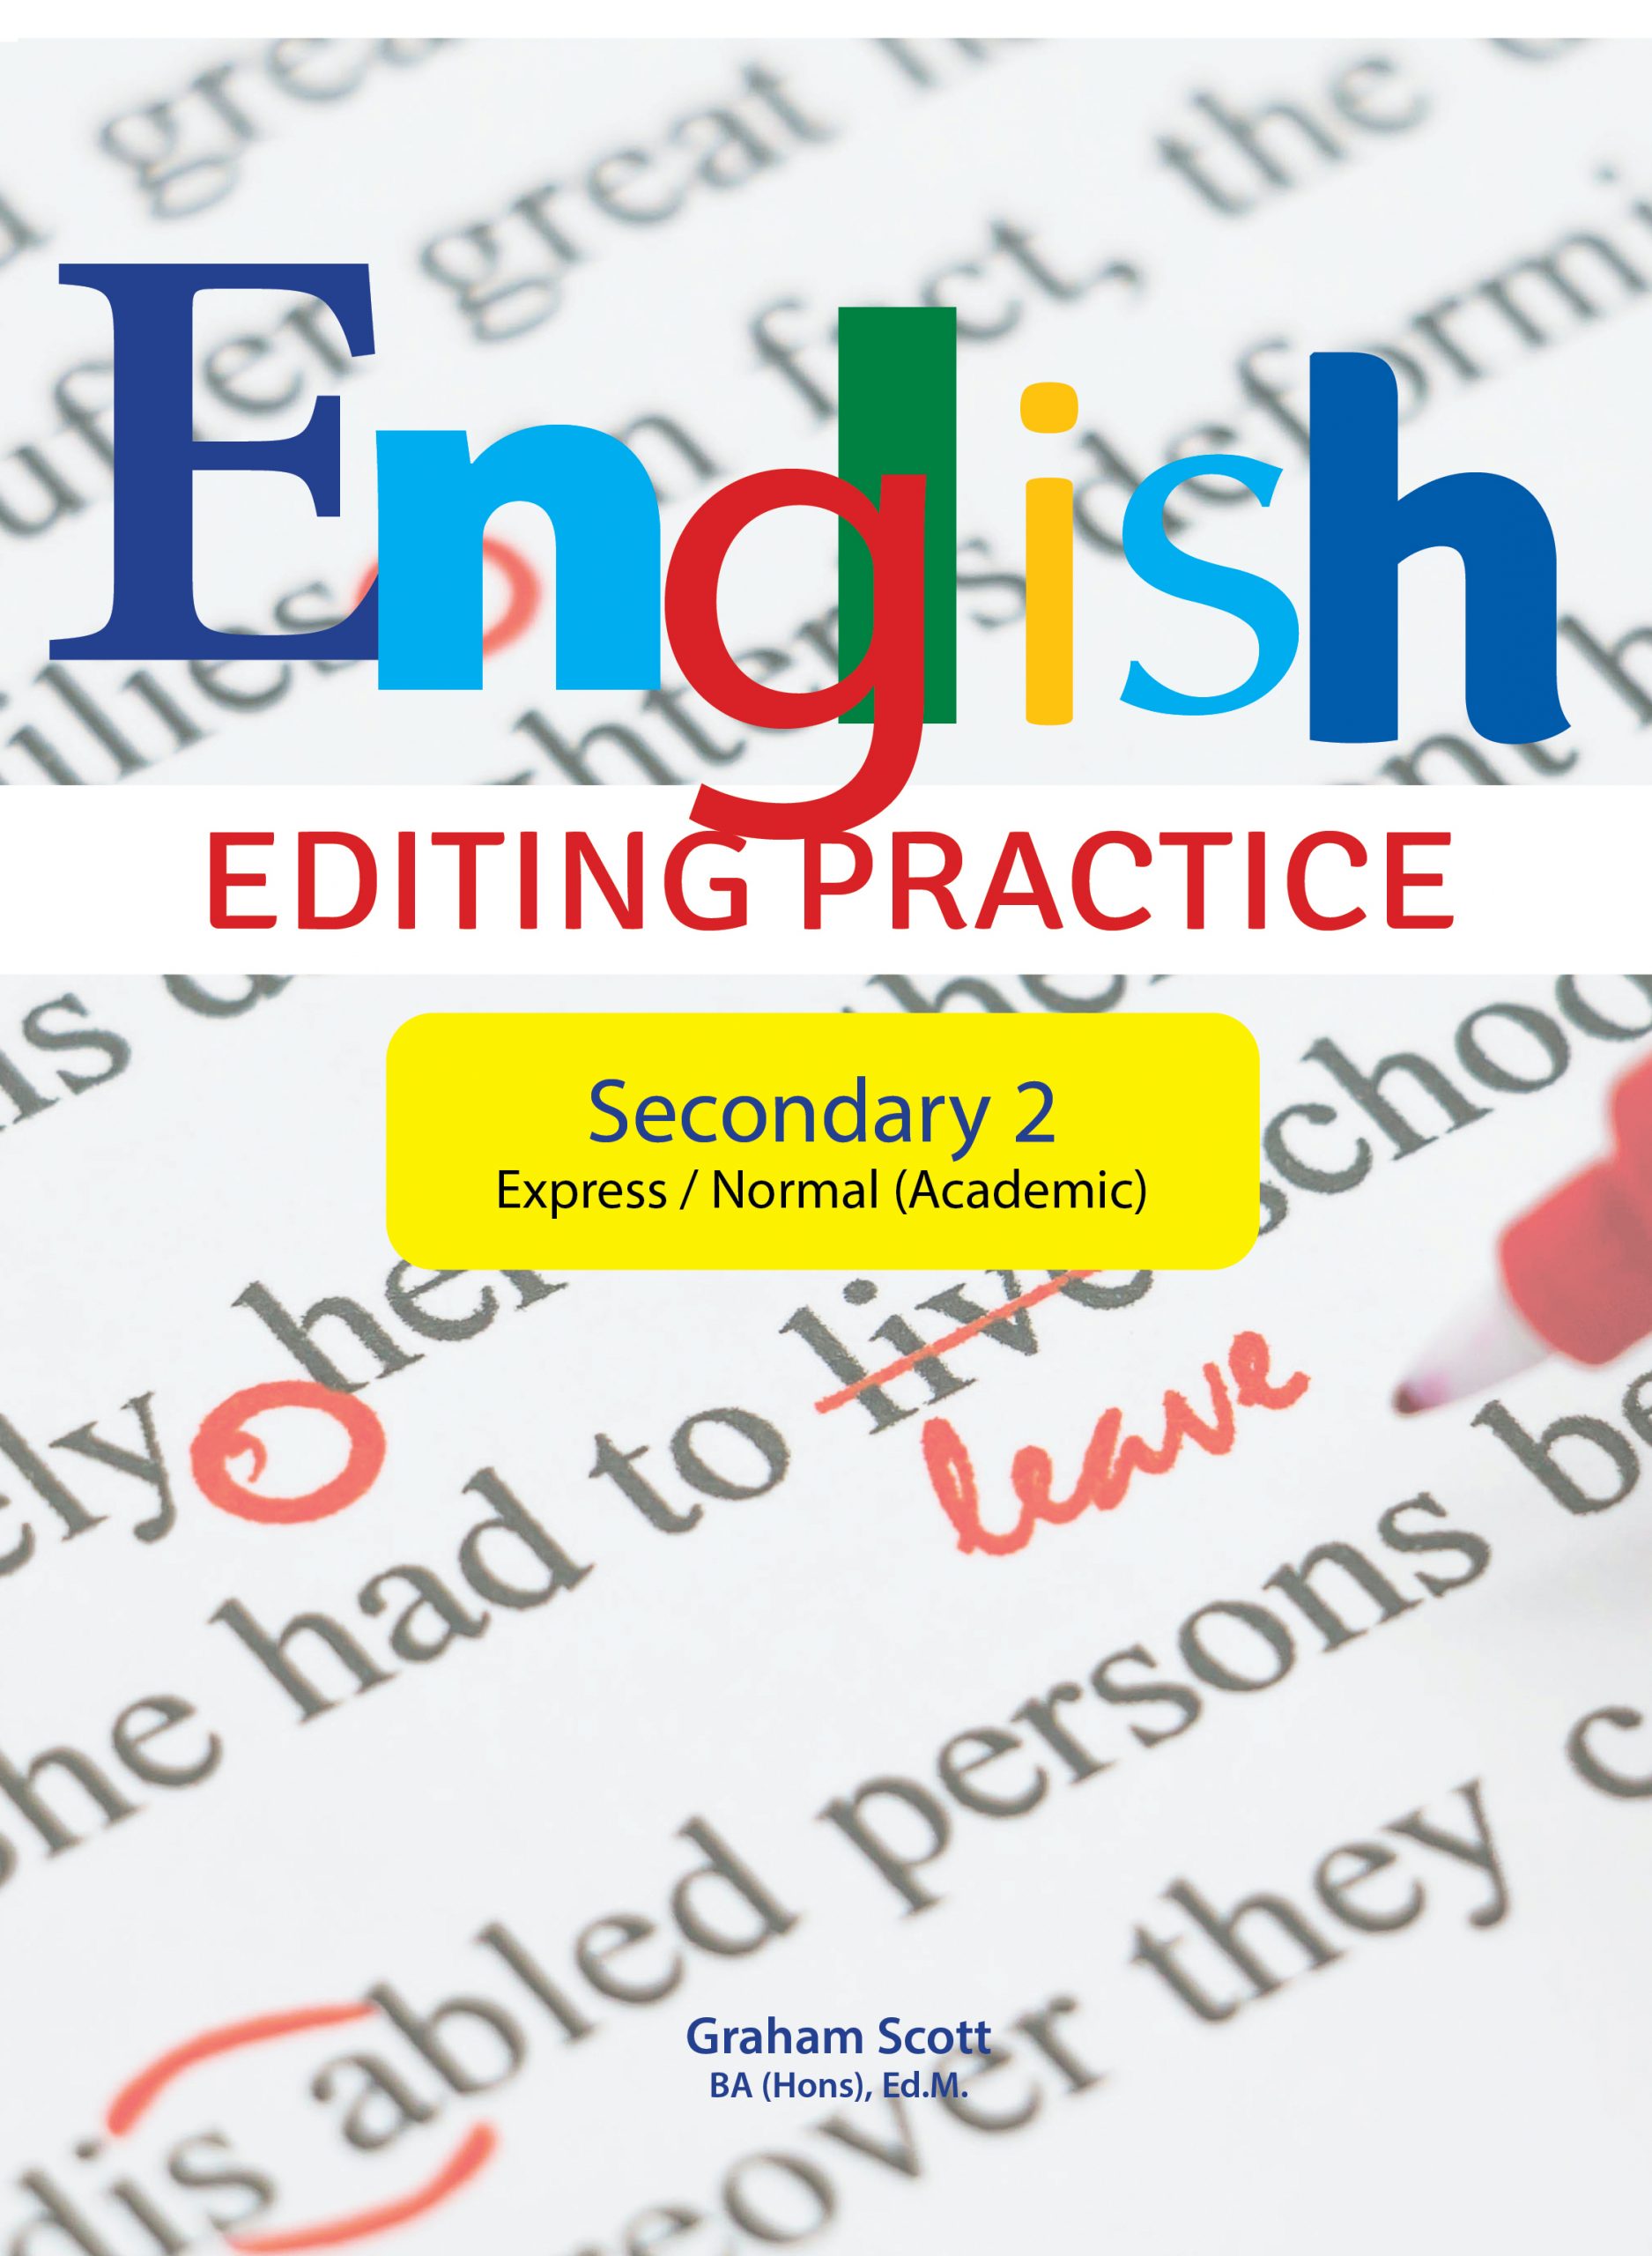 english-editing-practice-secondary-2-exp-n-a-cpd-singapore-education-services-pte-ltd